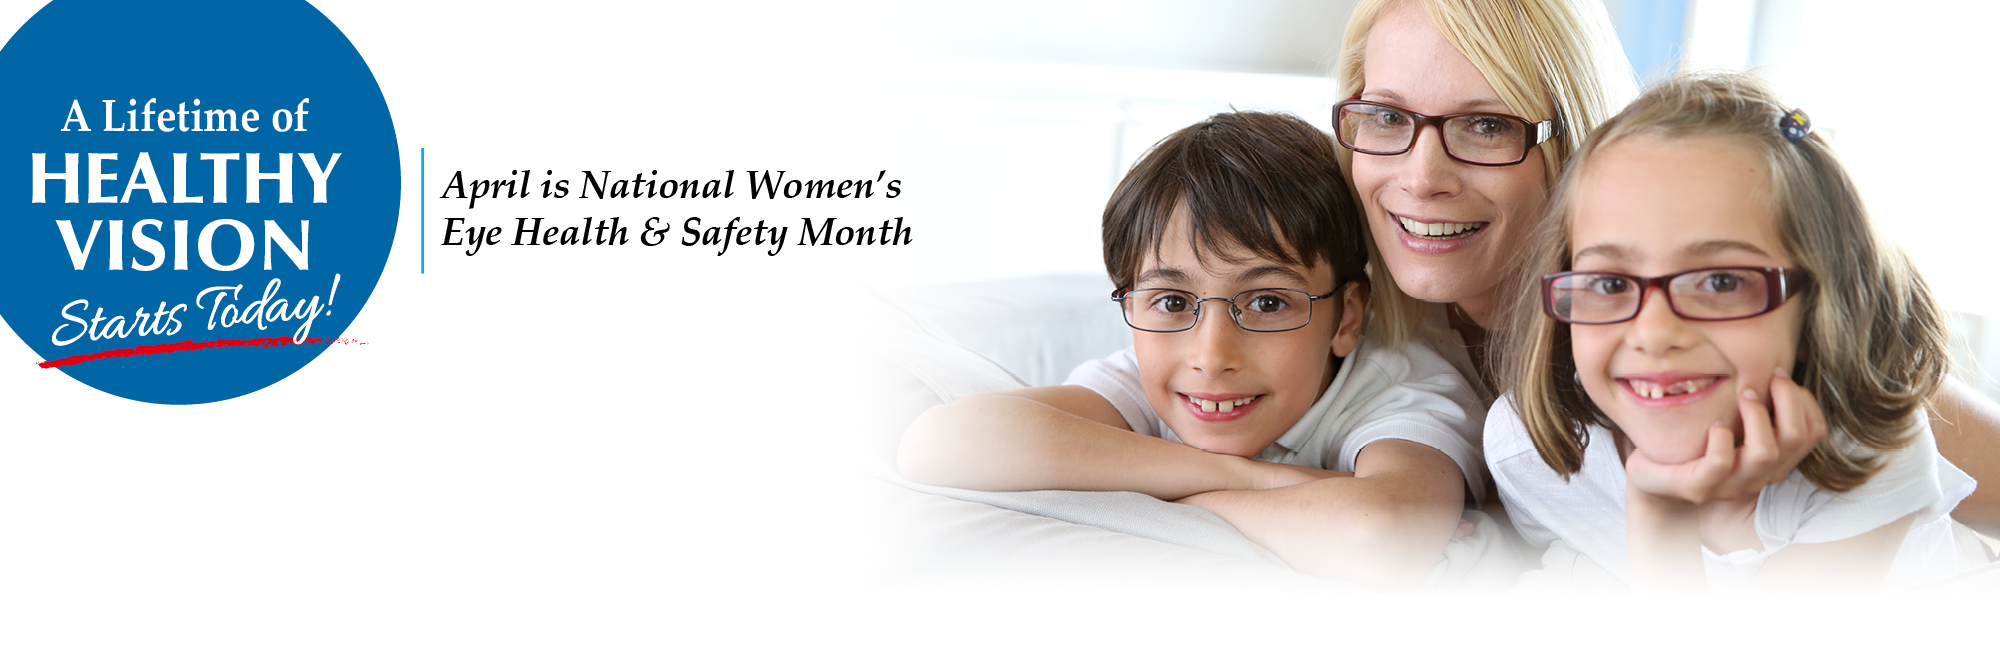 April is Women’s Eye Health & Safety Month